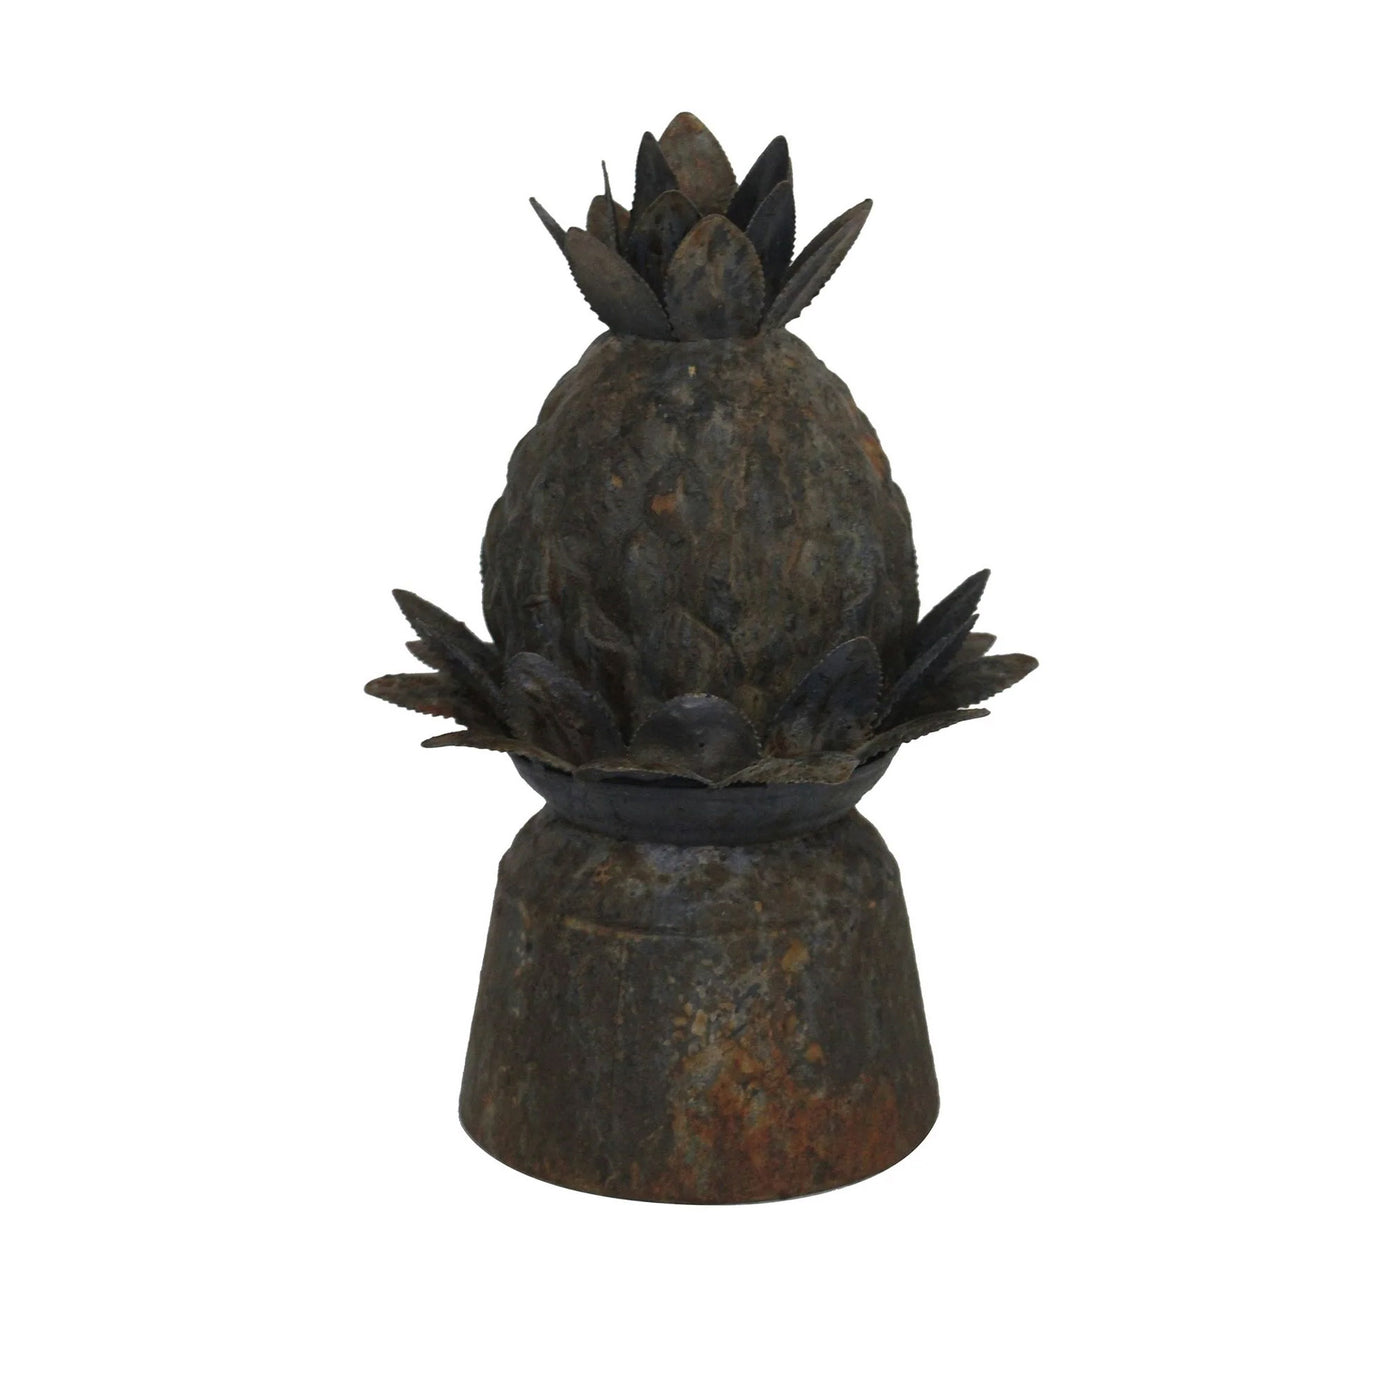 Primitive Style Pineapple Finial